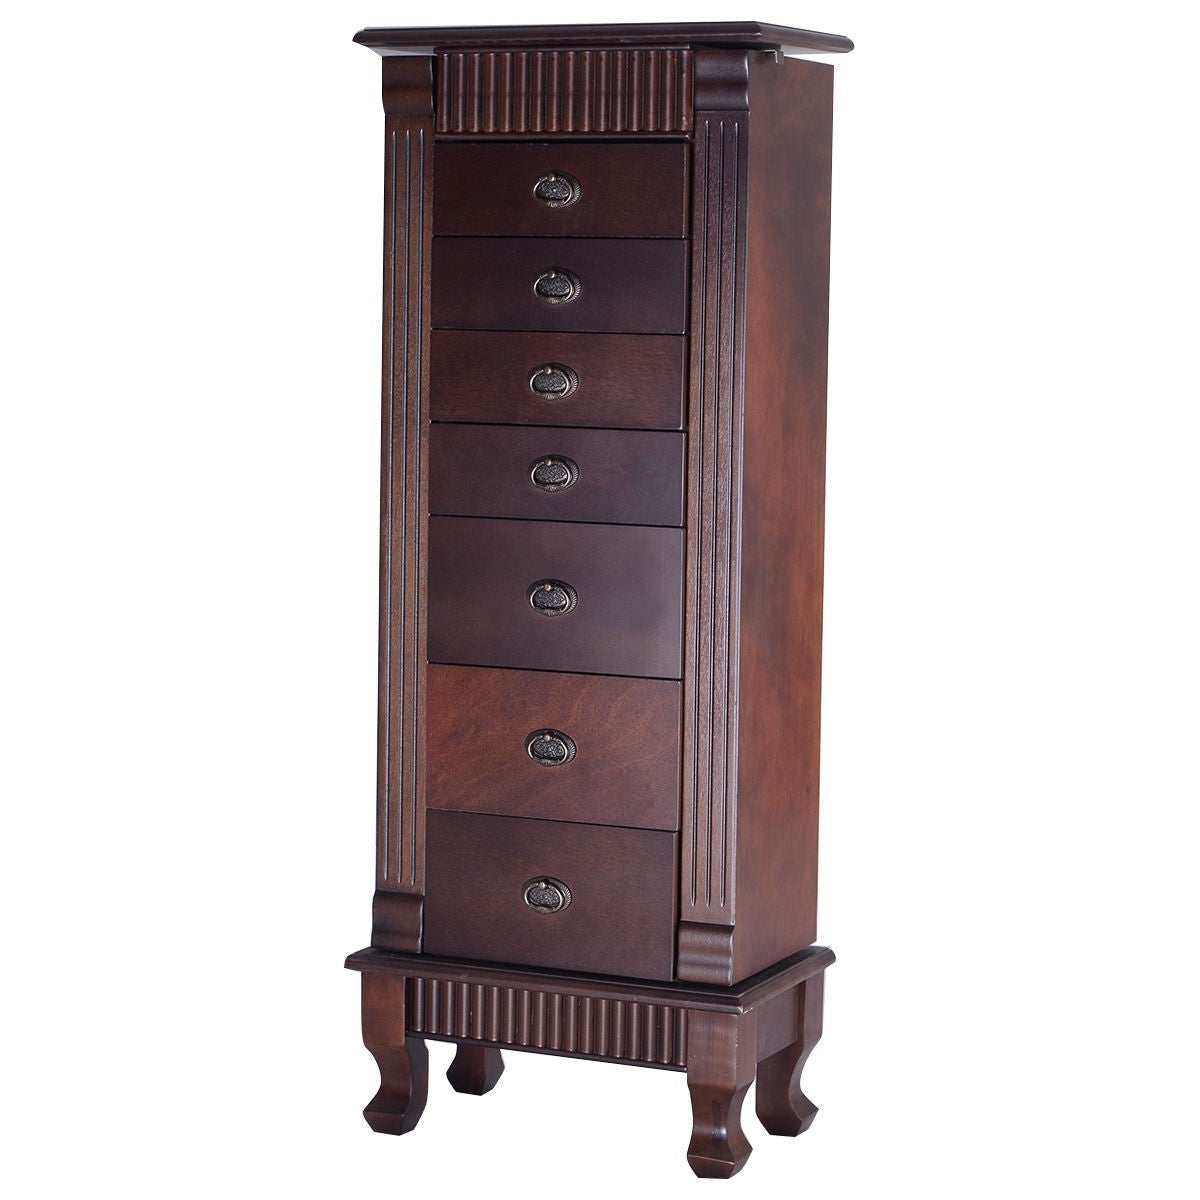 Accents > Jewelry Armoires & Boxes - Classic 7-Drawer Jewelry Armoire Wood Storage Chest Cabinet